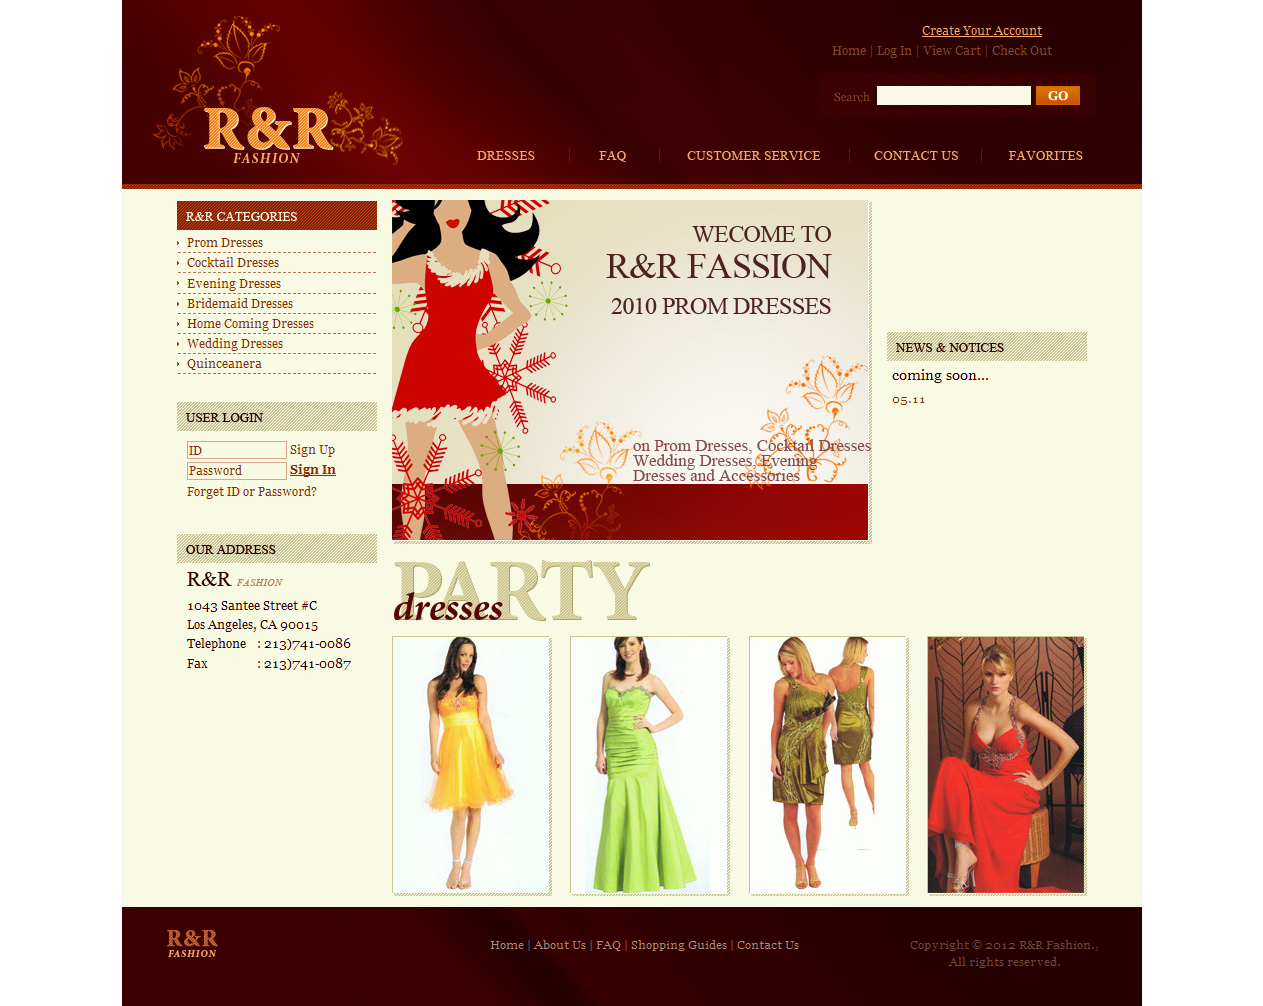 FireShot Screen Capture #114 - 'R&R FASSION' - rnrpartydress_bkihost2_com_web.png